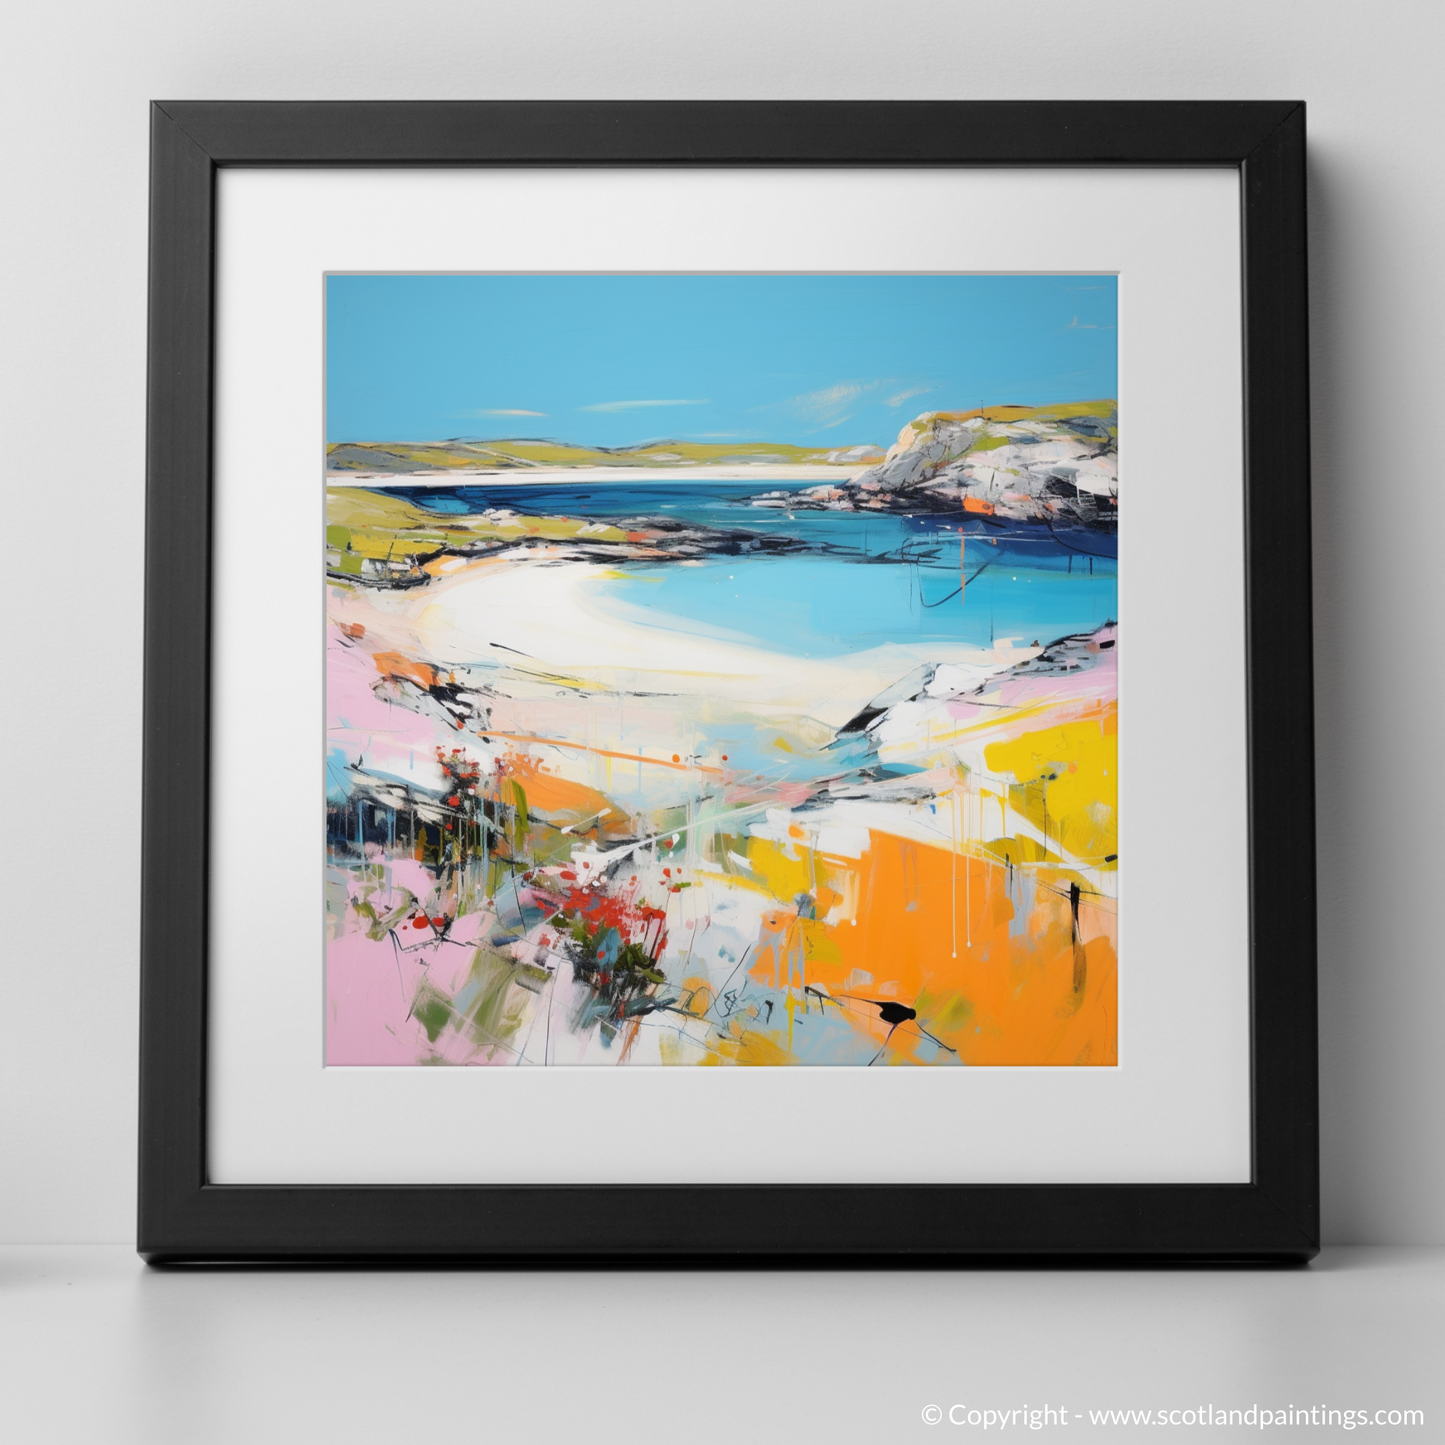 Art Print of Achmelvich Bay, Sutherland in summer with a black frame